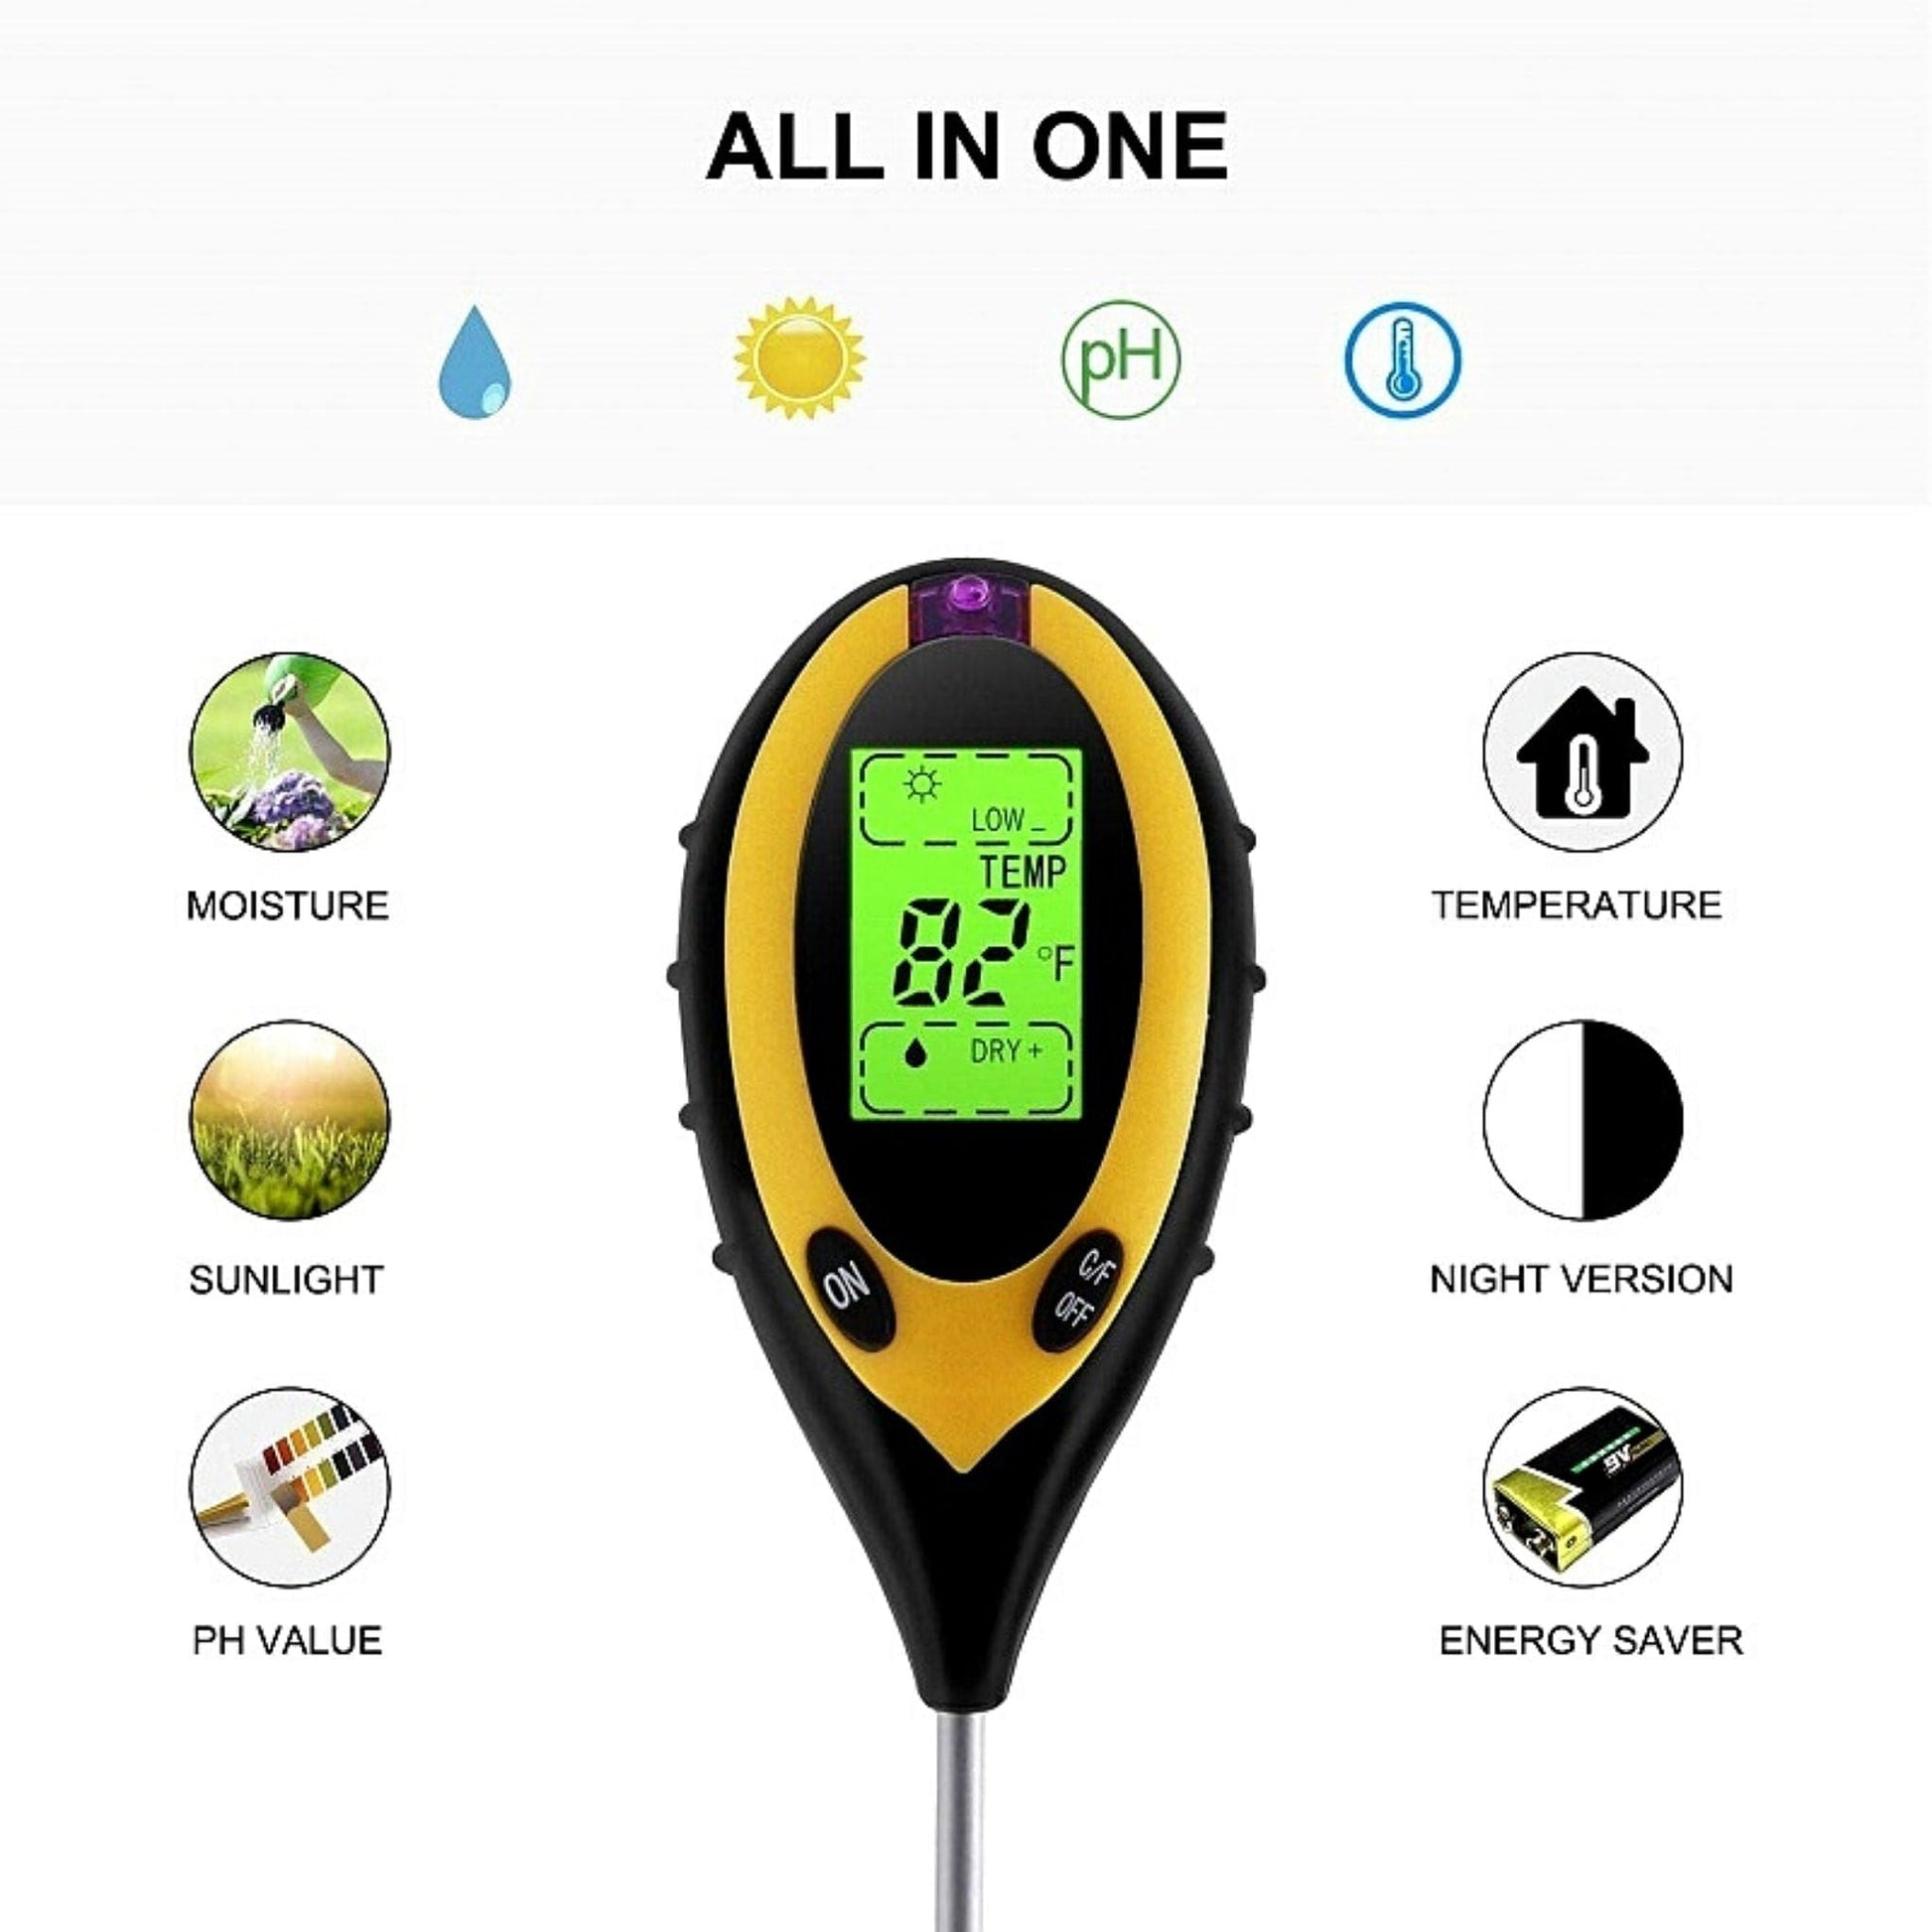 Digital Soil Thermometer 4-in-1 Soil Tester Soil Thermometer/Light/Air  Temperature/Air Humidity Meter Digital Soil/Plant Environment Survey  Instrument